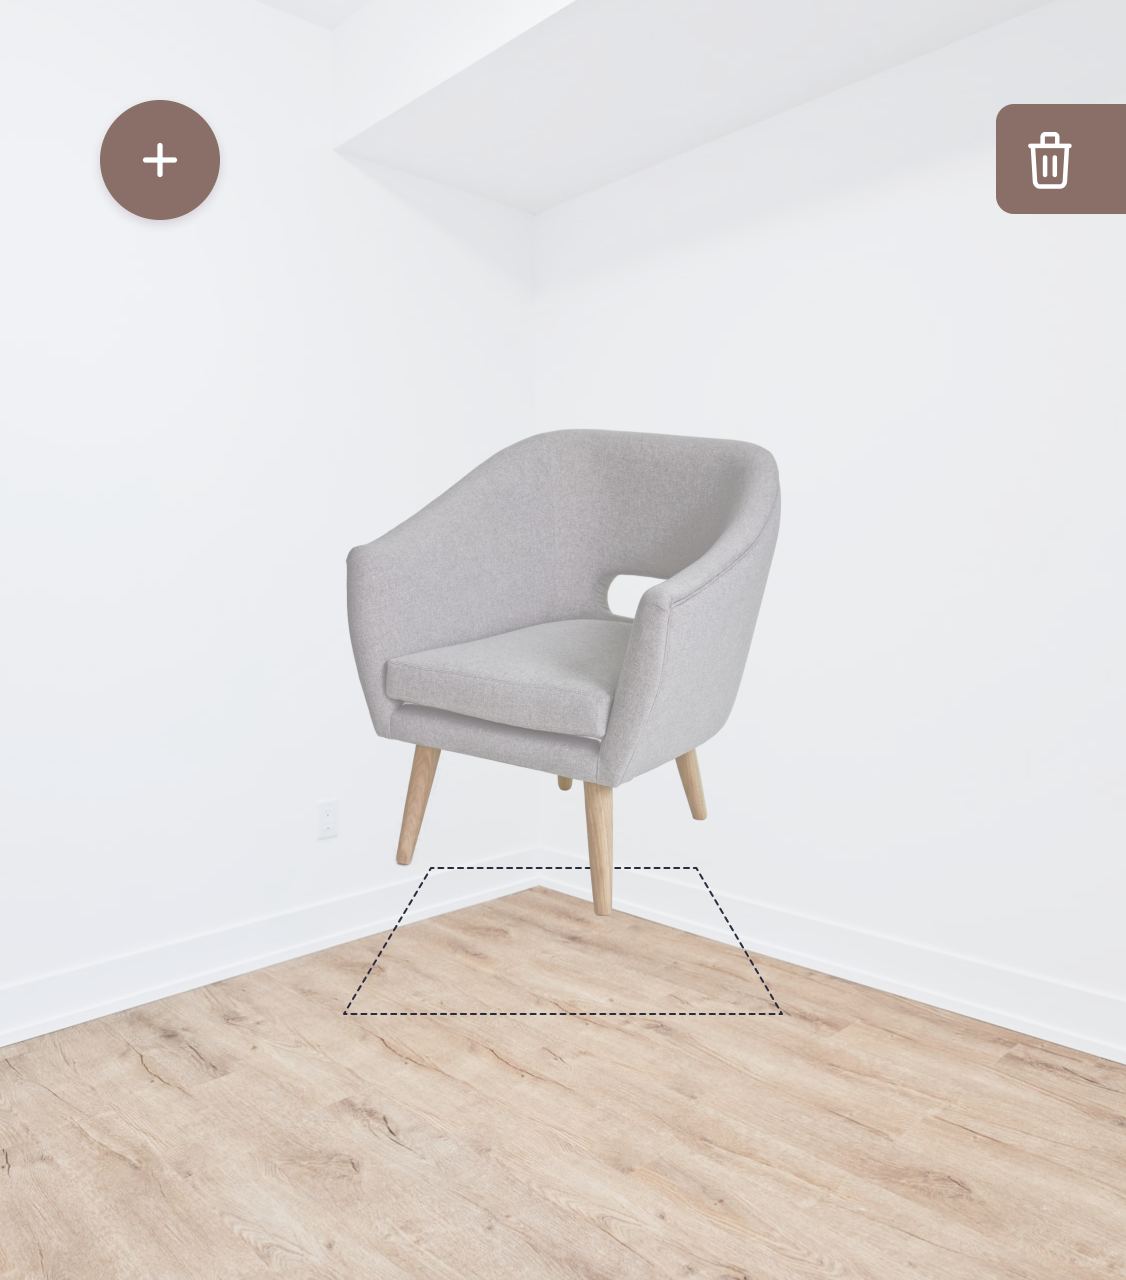 Choose furniture with augmented reality